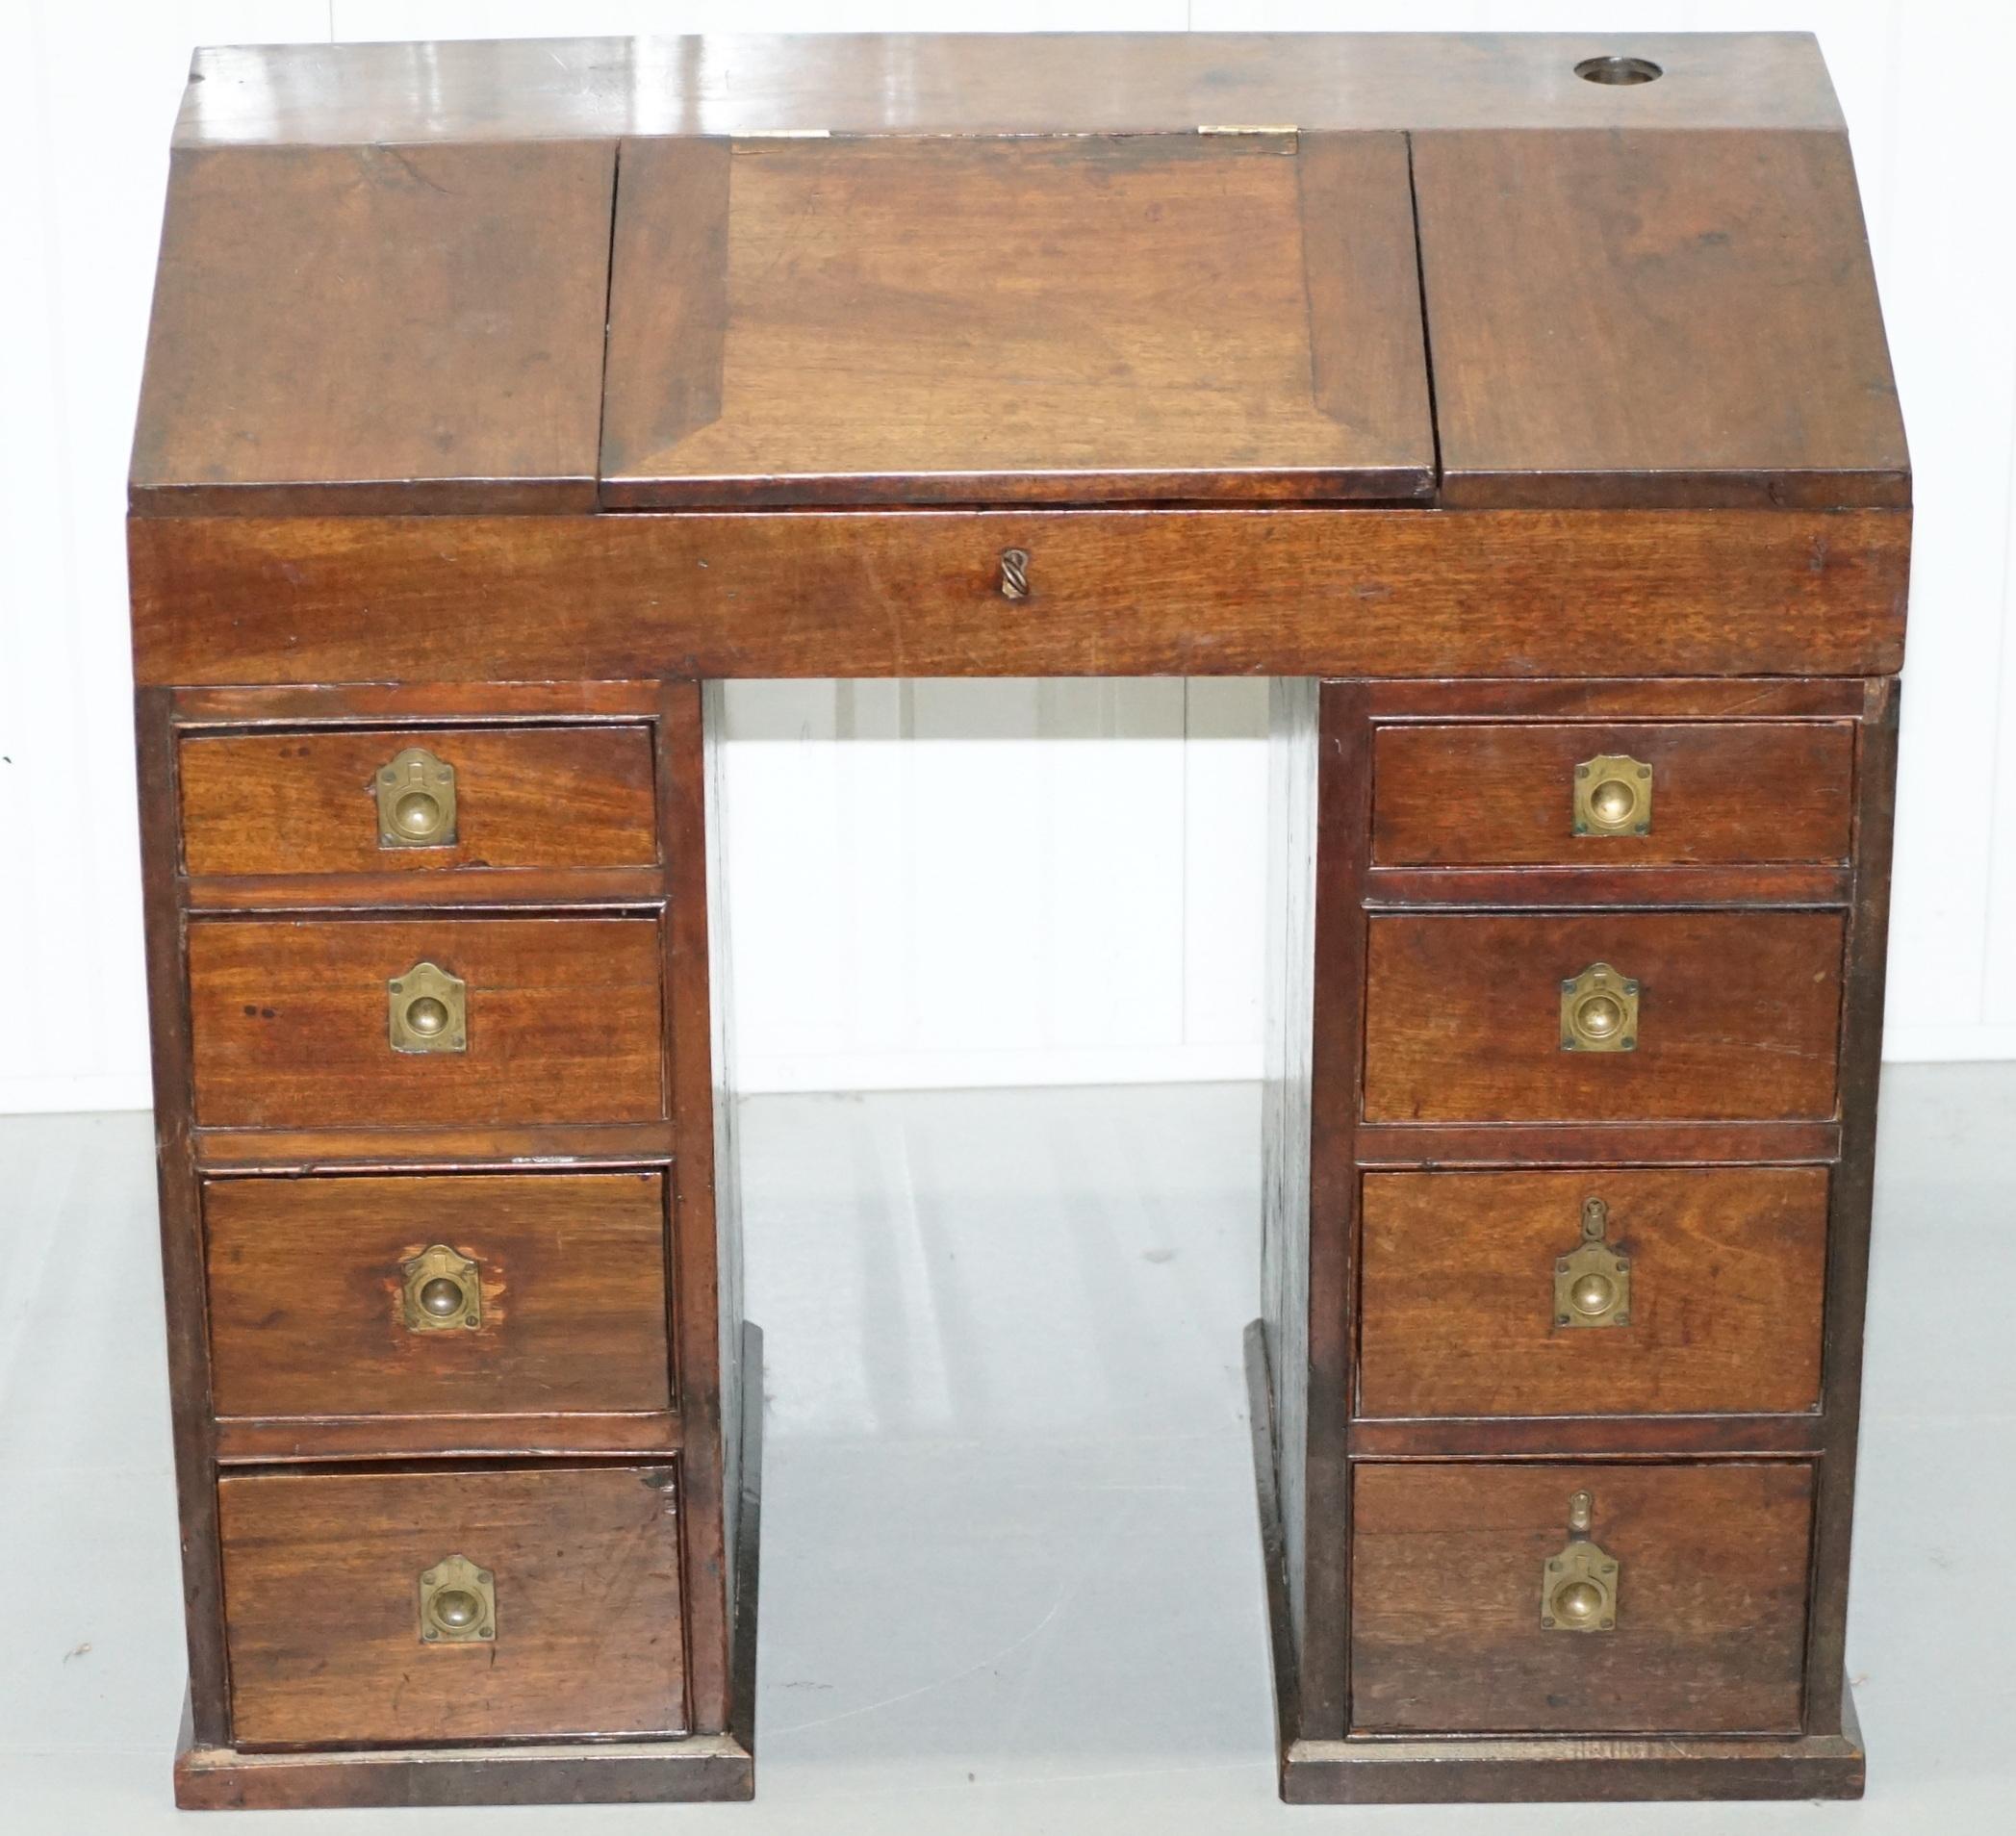 We are delighted to offer for sale this very nice early Victorian apprentice draftsman desk

A good looking well-made piece, for today's sizing this would great a great little desk where space is limited or perhaps as a children’s school